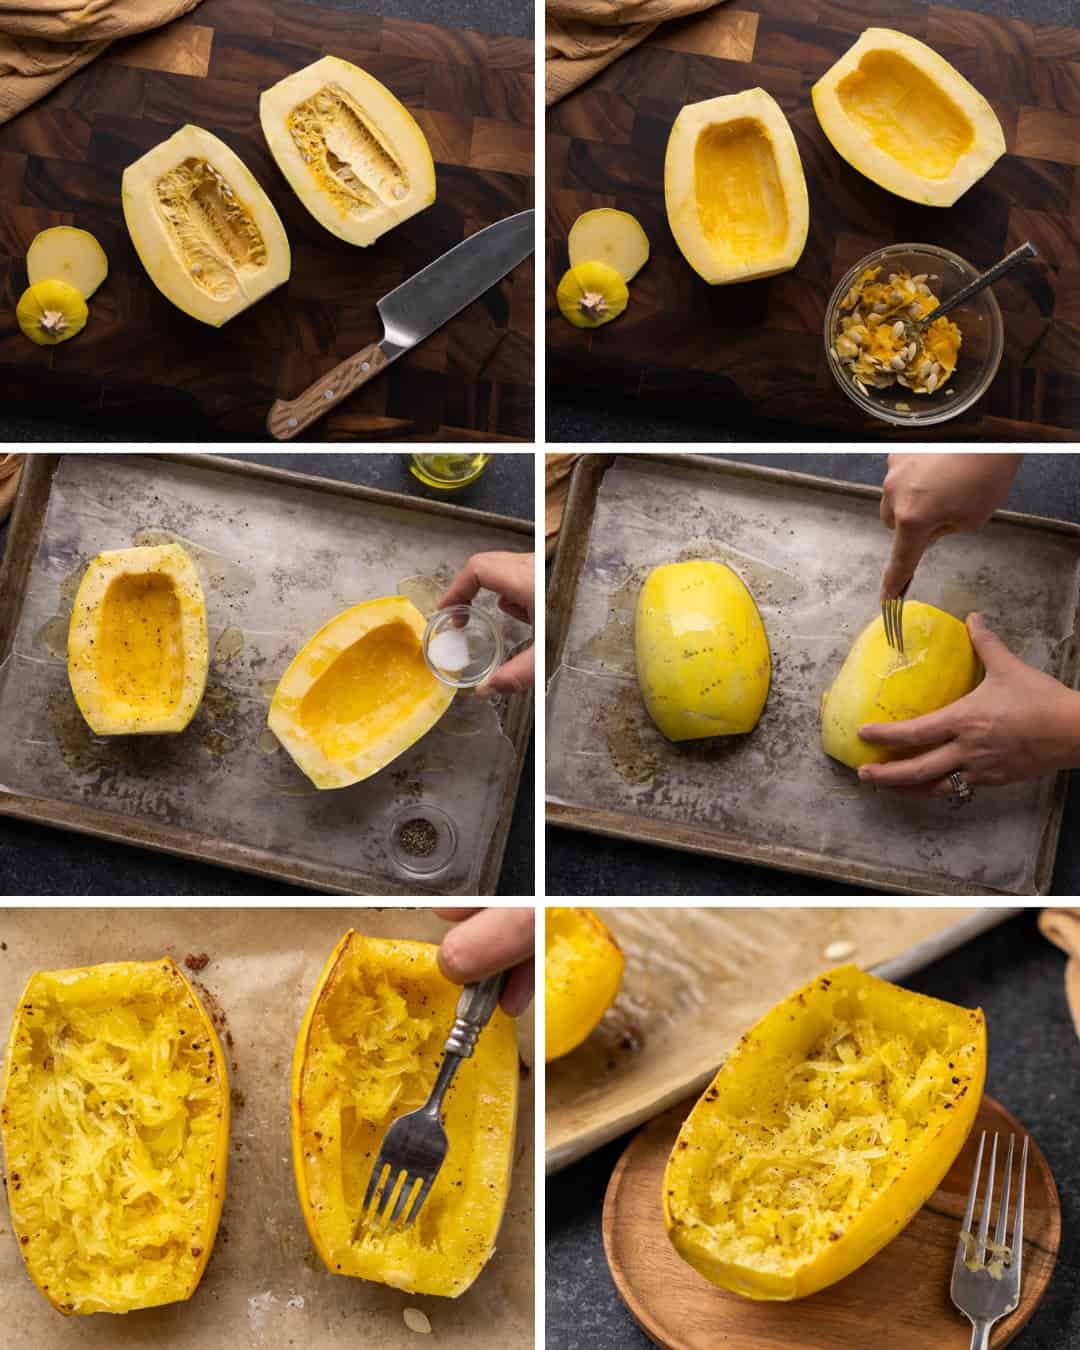 Edit photo collage to show how to make spaghetti squash from start to finish.